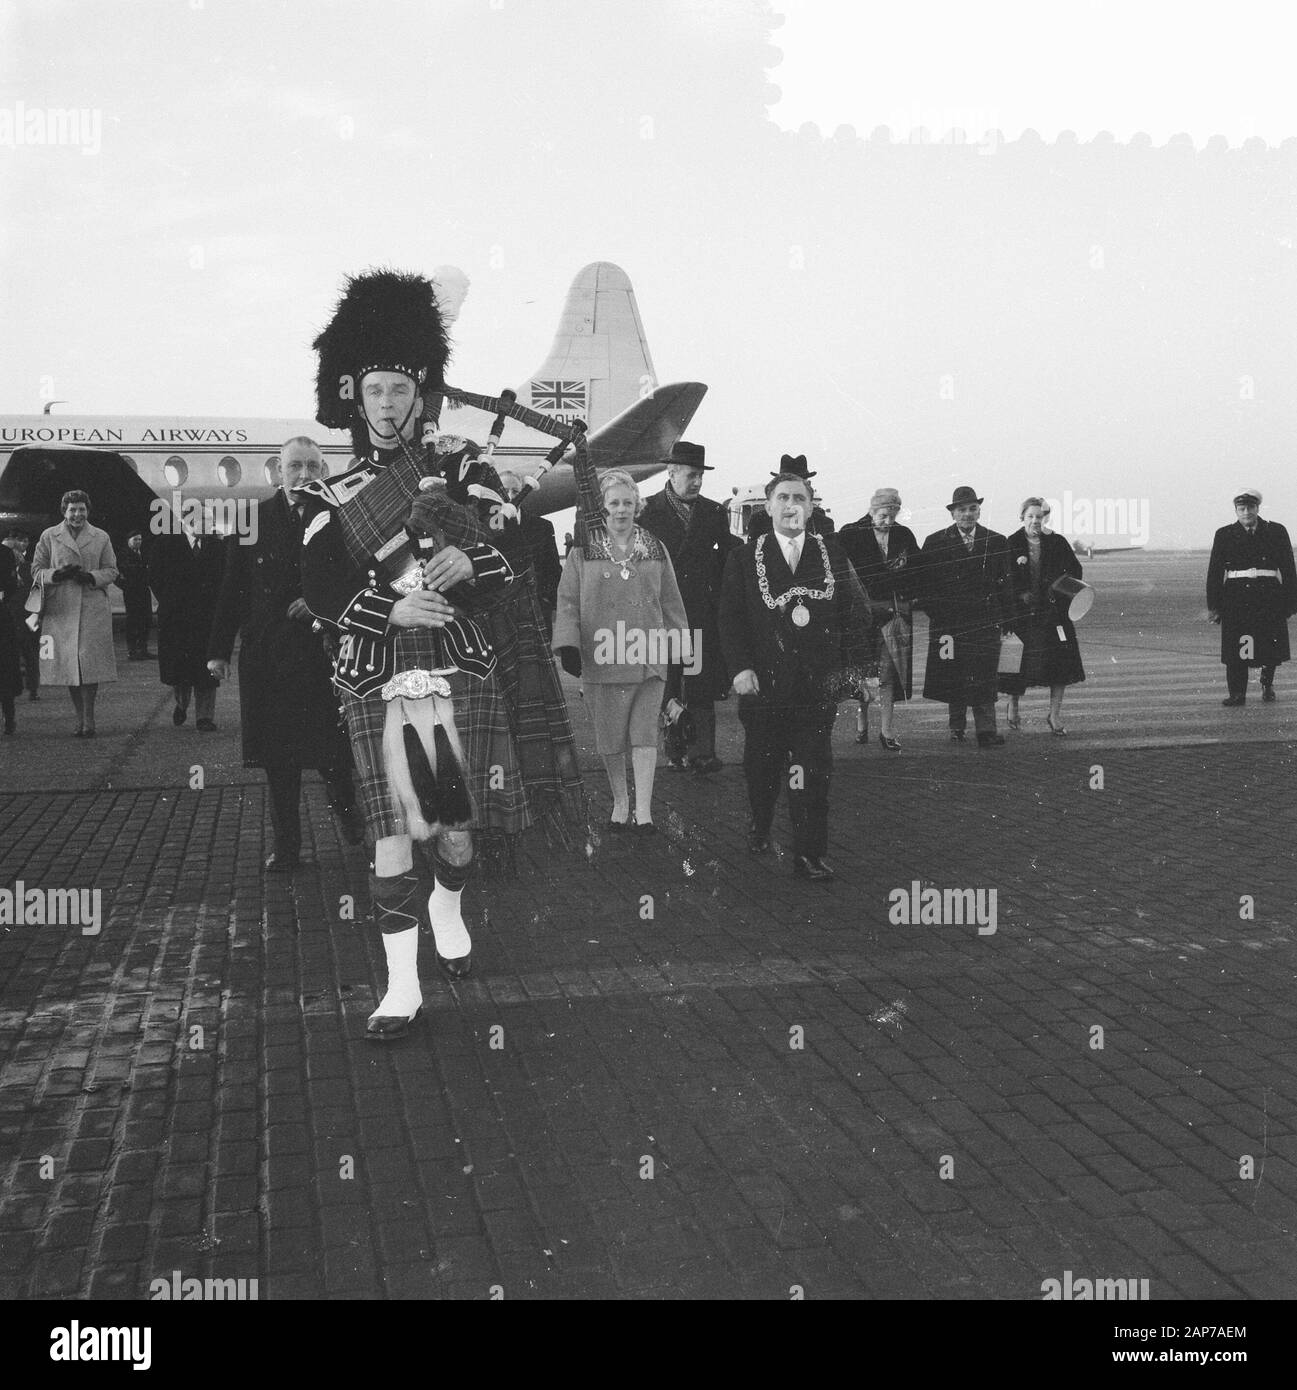 Arrival Lord Provost of Glasgow at Schiphol Airport, the company on the way to the waiting room in front of a bagpipe player Date: December 6, 1959 Keywords: ARRIVAL, COMPANY, bagpipe players Personal name: Lord Provost Stock Photo